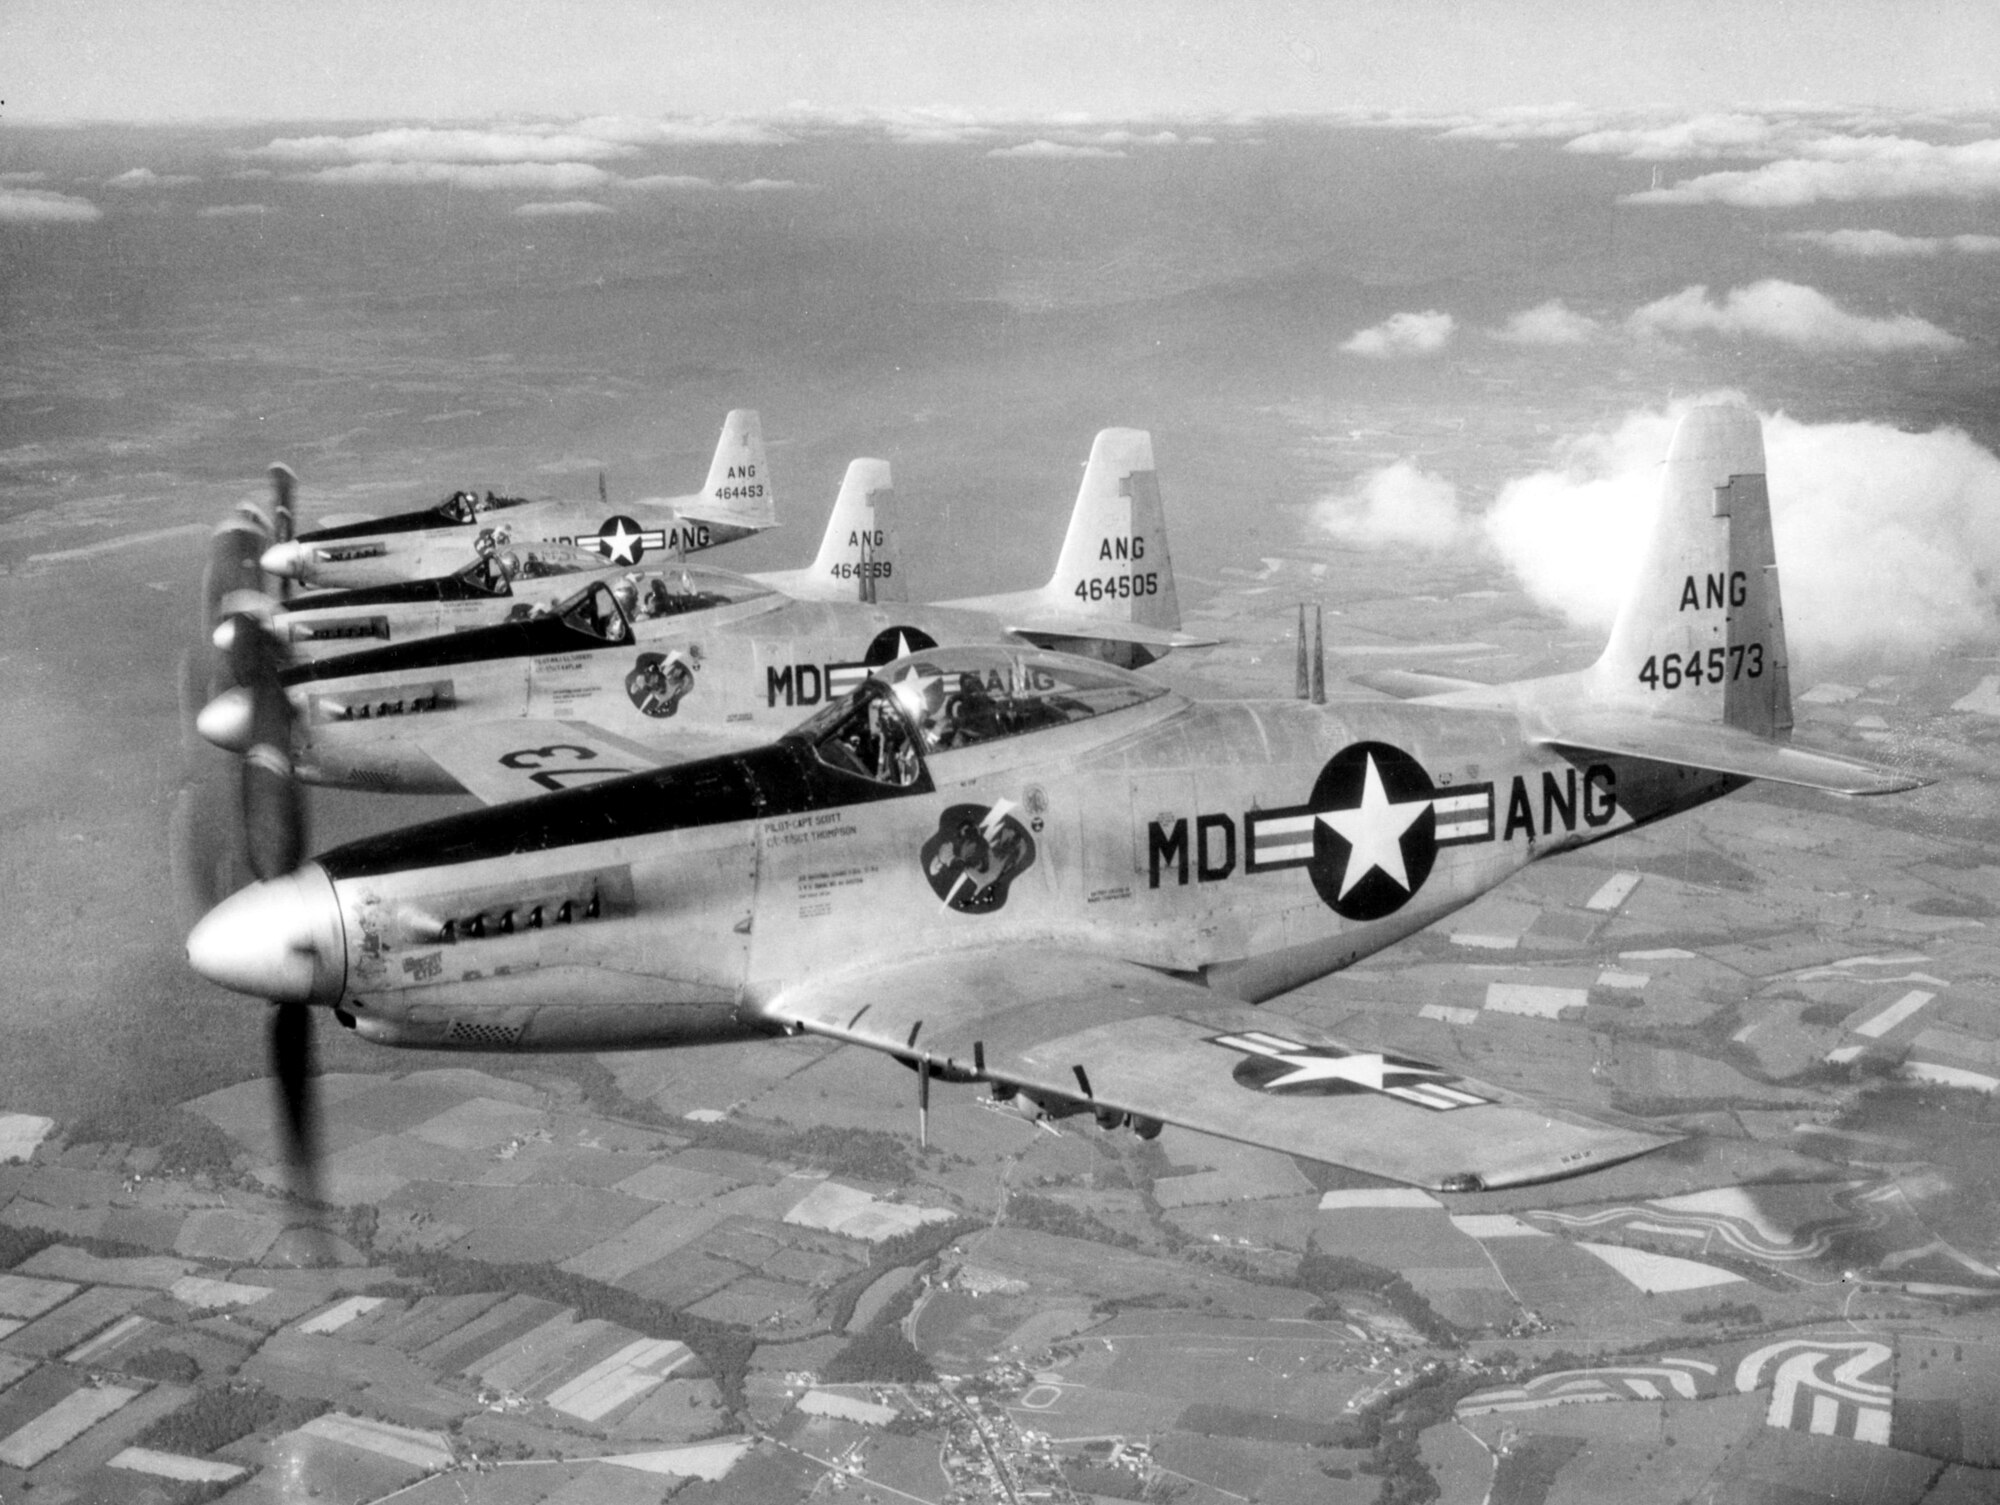 The Maryland Air National Guard's aerial demonstration team, the Guardian Angels, fly their F-51H fighters in close formation. Maryland had an aerial demonstration team from 1952 to 1953. (Released)